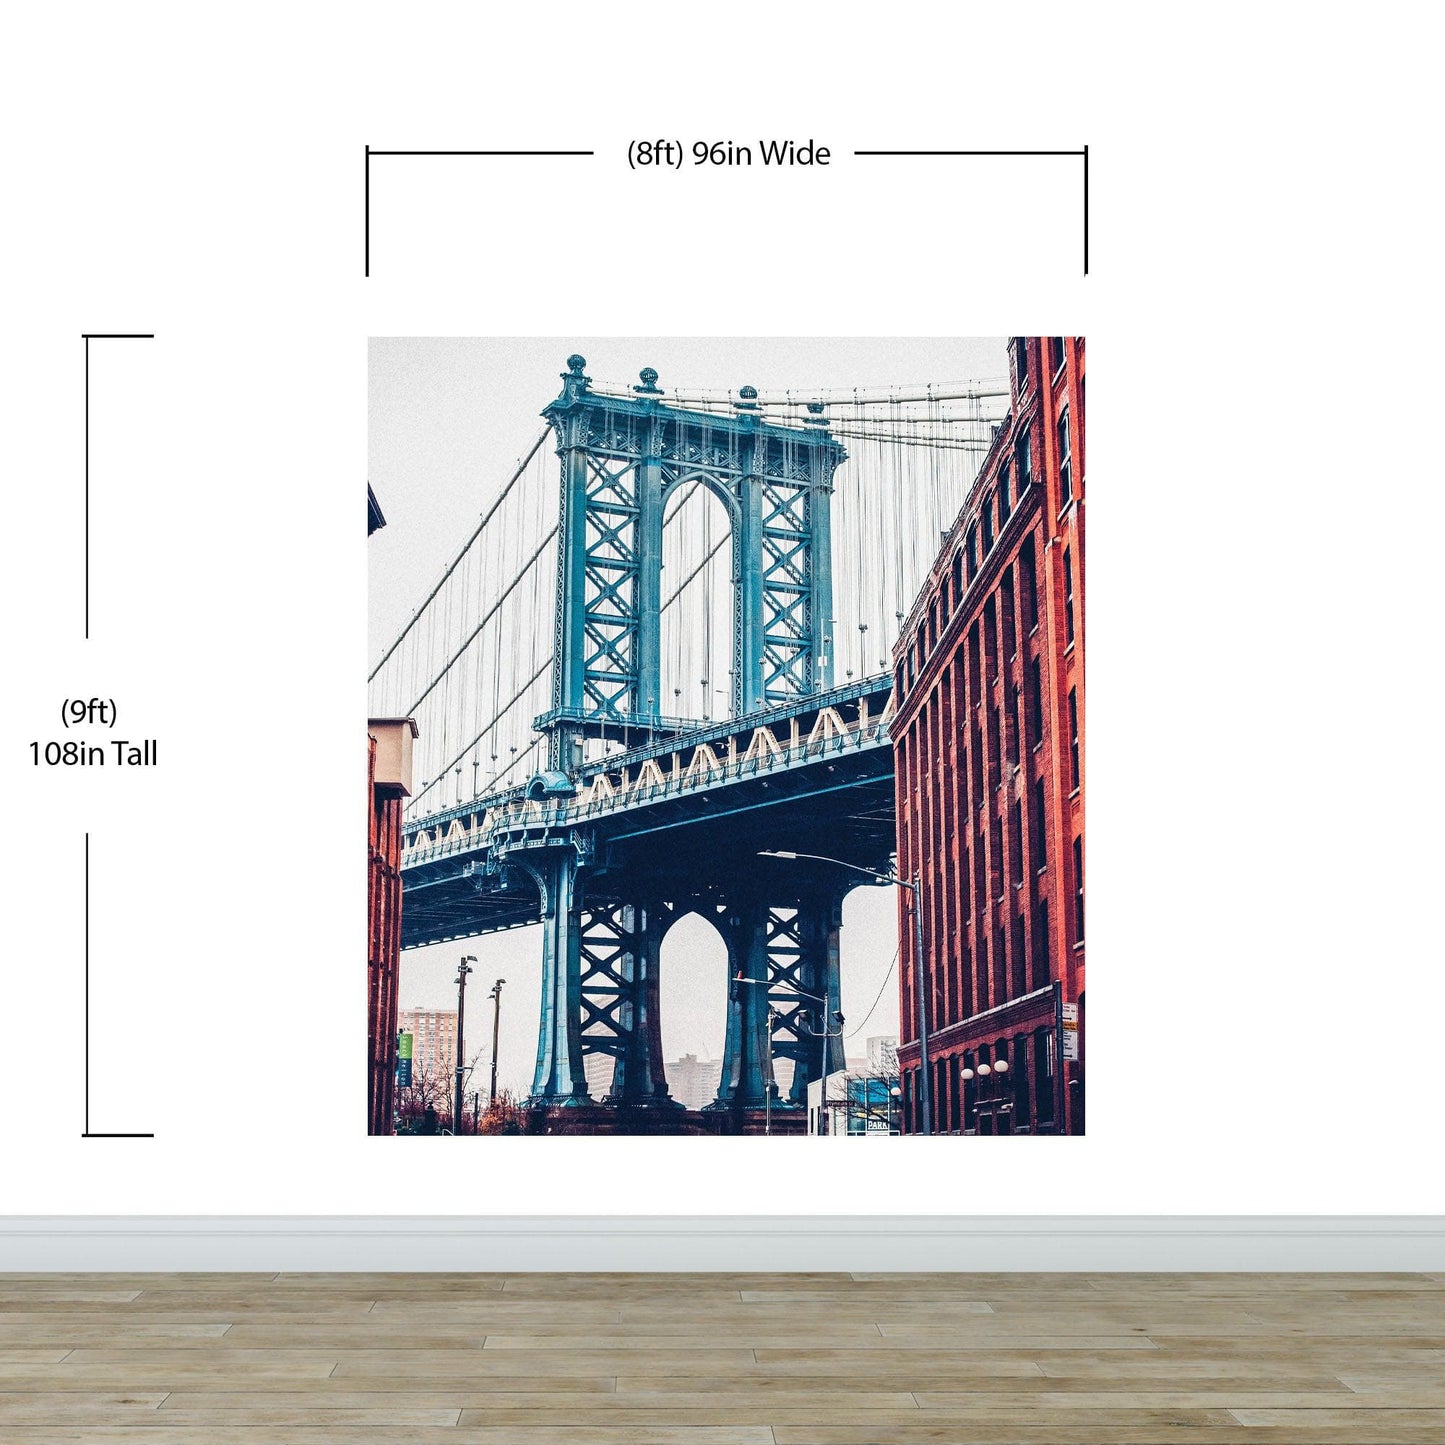 New York City Wall Mural Peel and Stick Wallpaper. Vintage Dumbo NYC. Brooklyn NY Landscape Wallpaper. #6369